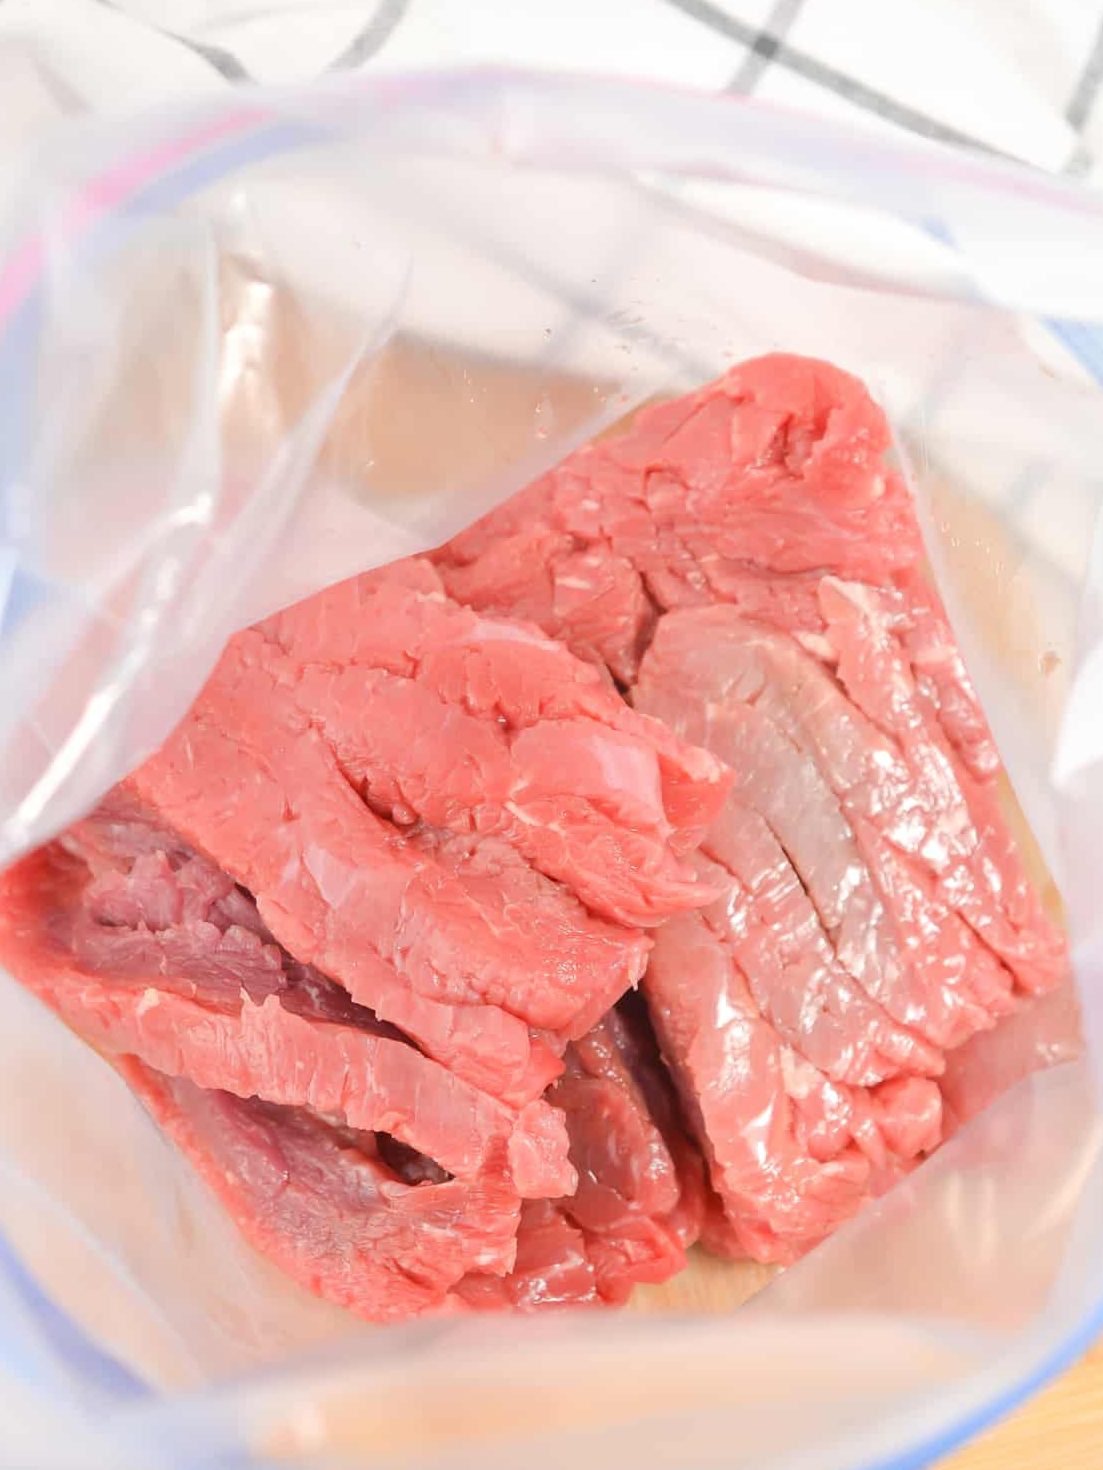 Add the steak slices to a Ziploc bag.